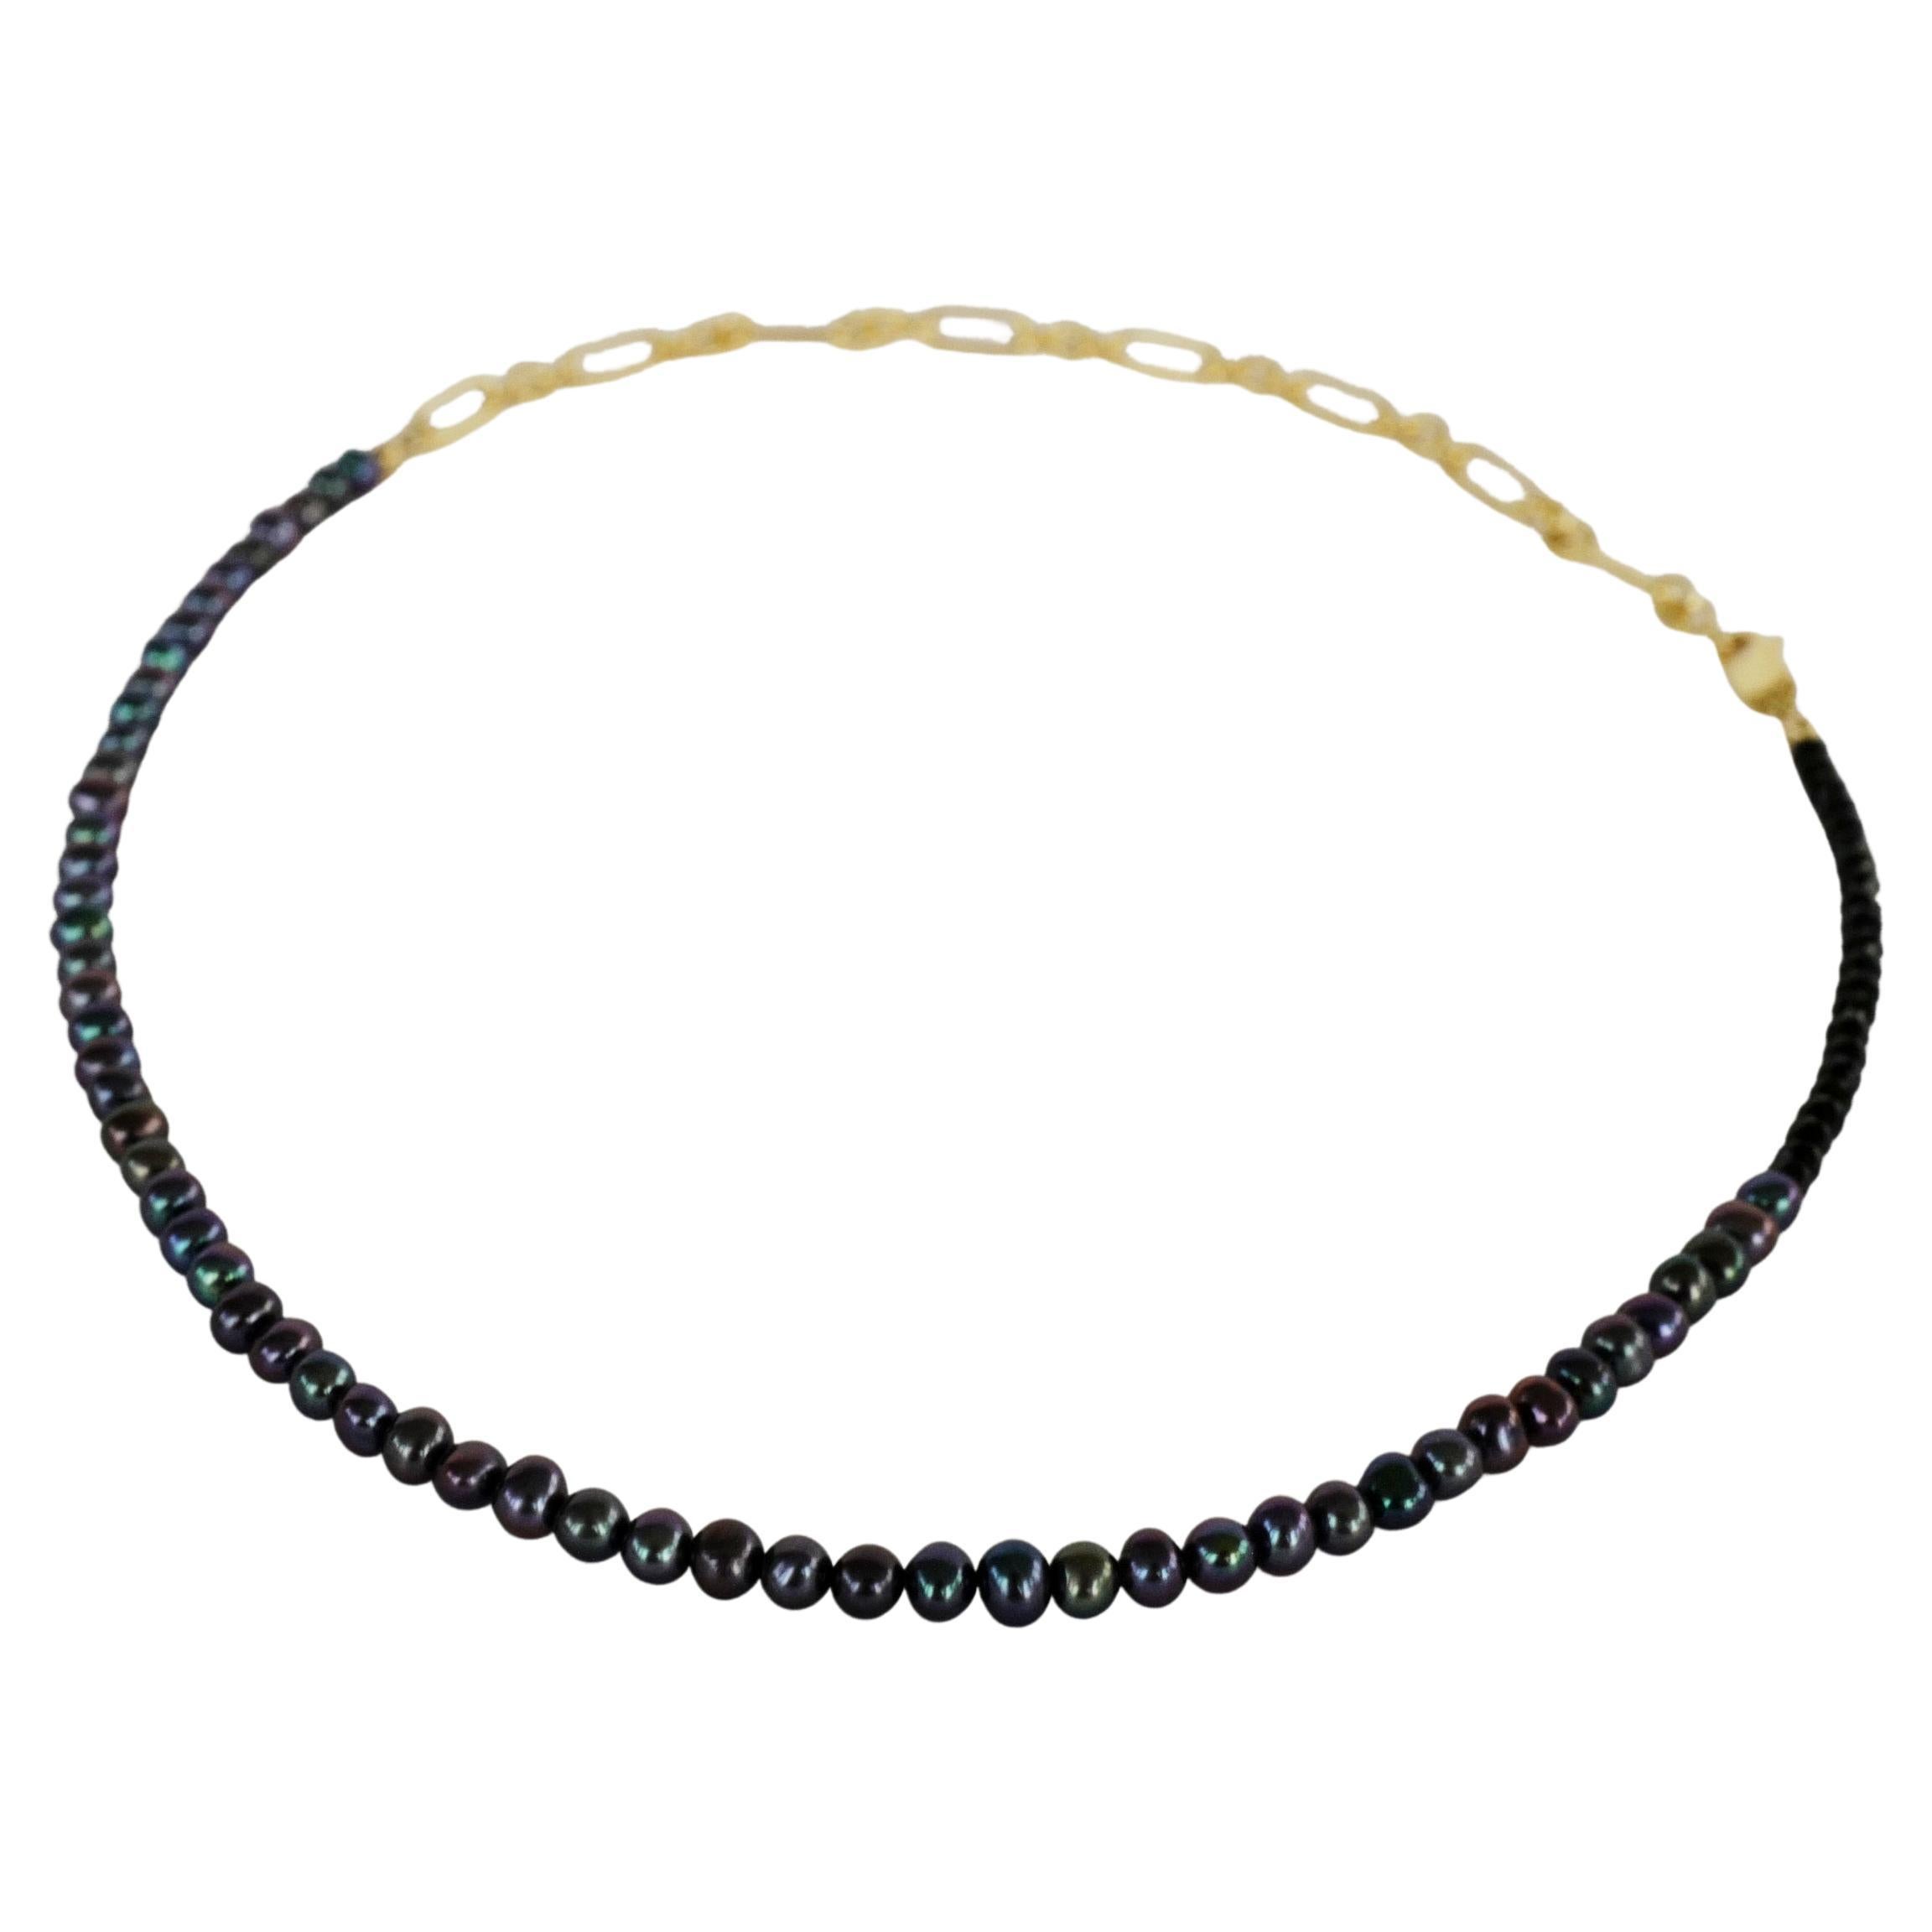 Black Pearl Beaded Choker Necklace Black Spinel Gold Filled Chain J Dauphin